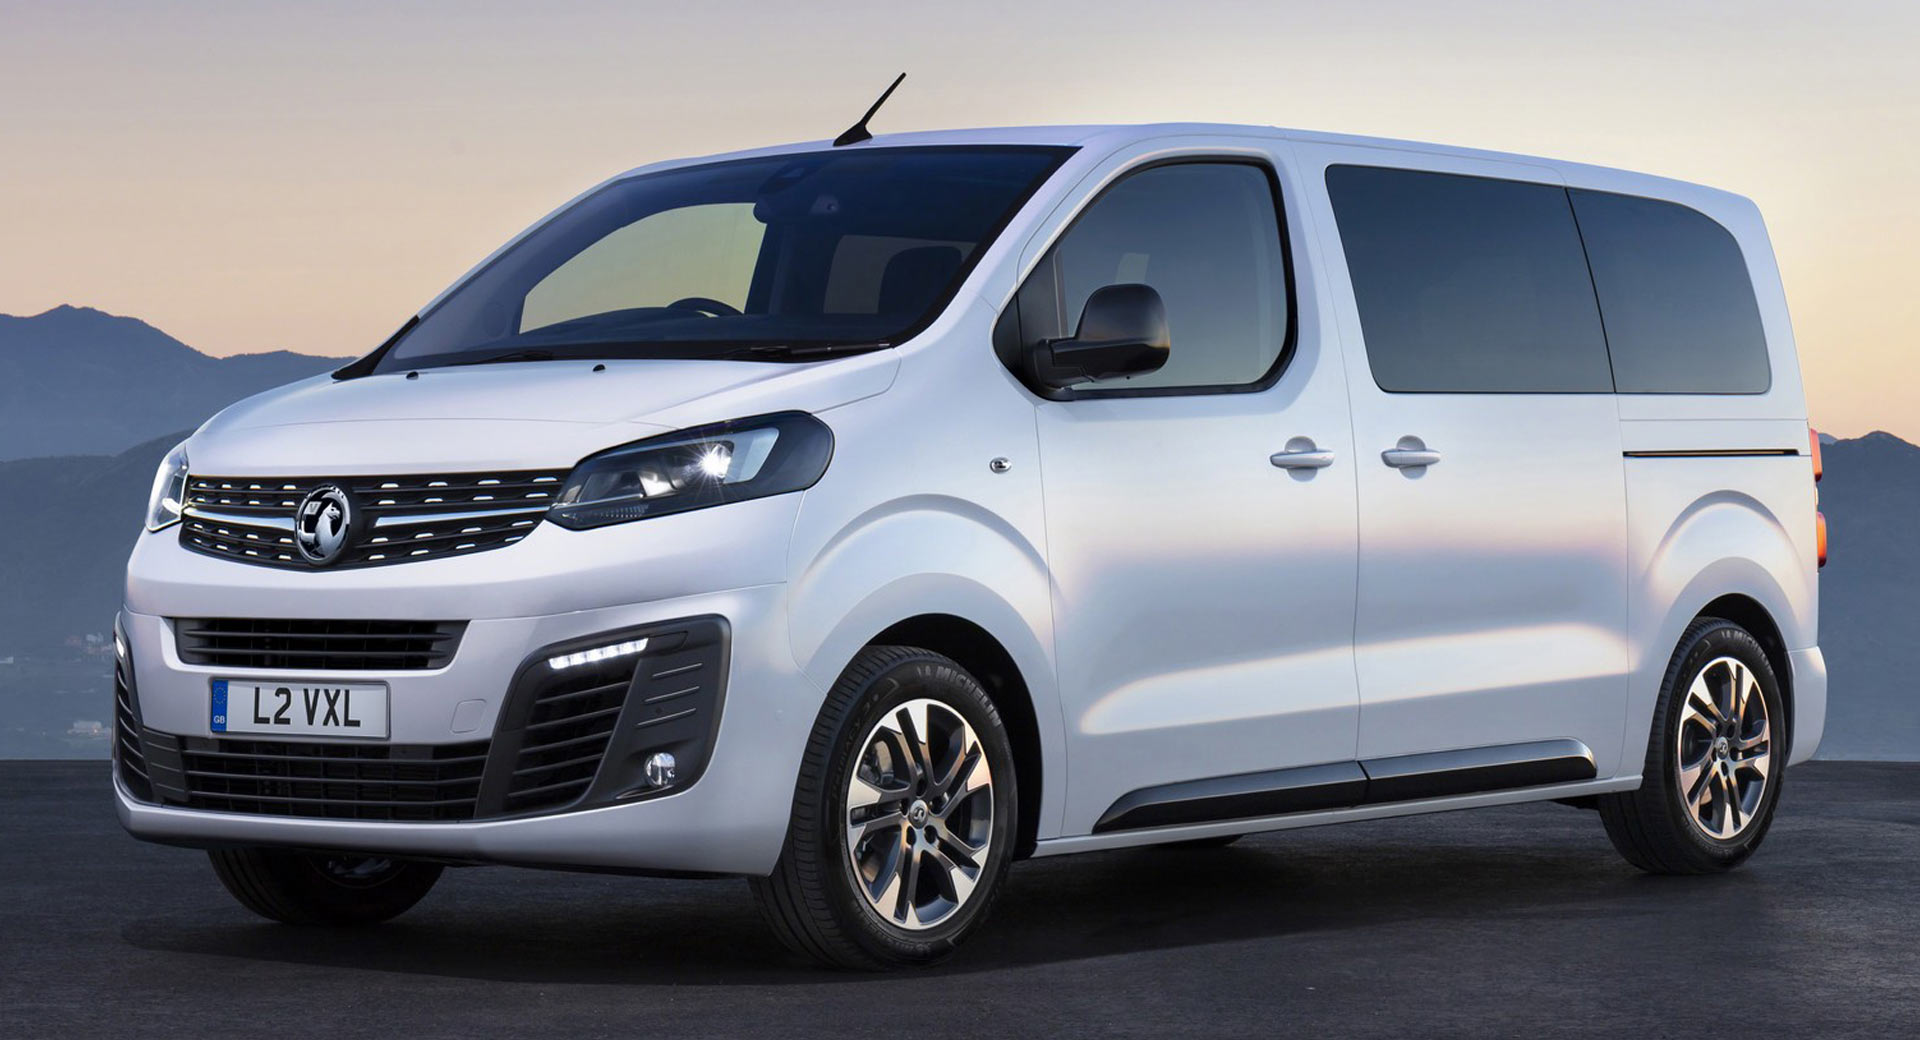 New Opel Vivaro Life Is A 9-Seat Van With An Available Electric Powertrain